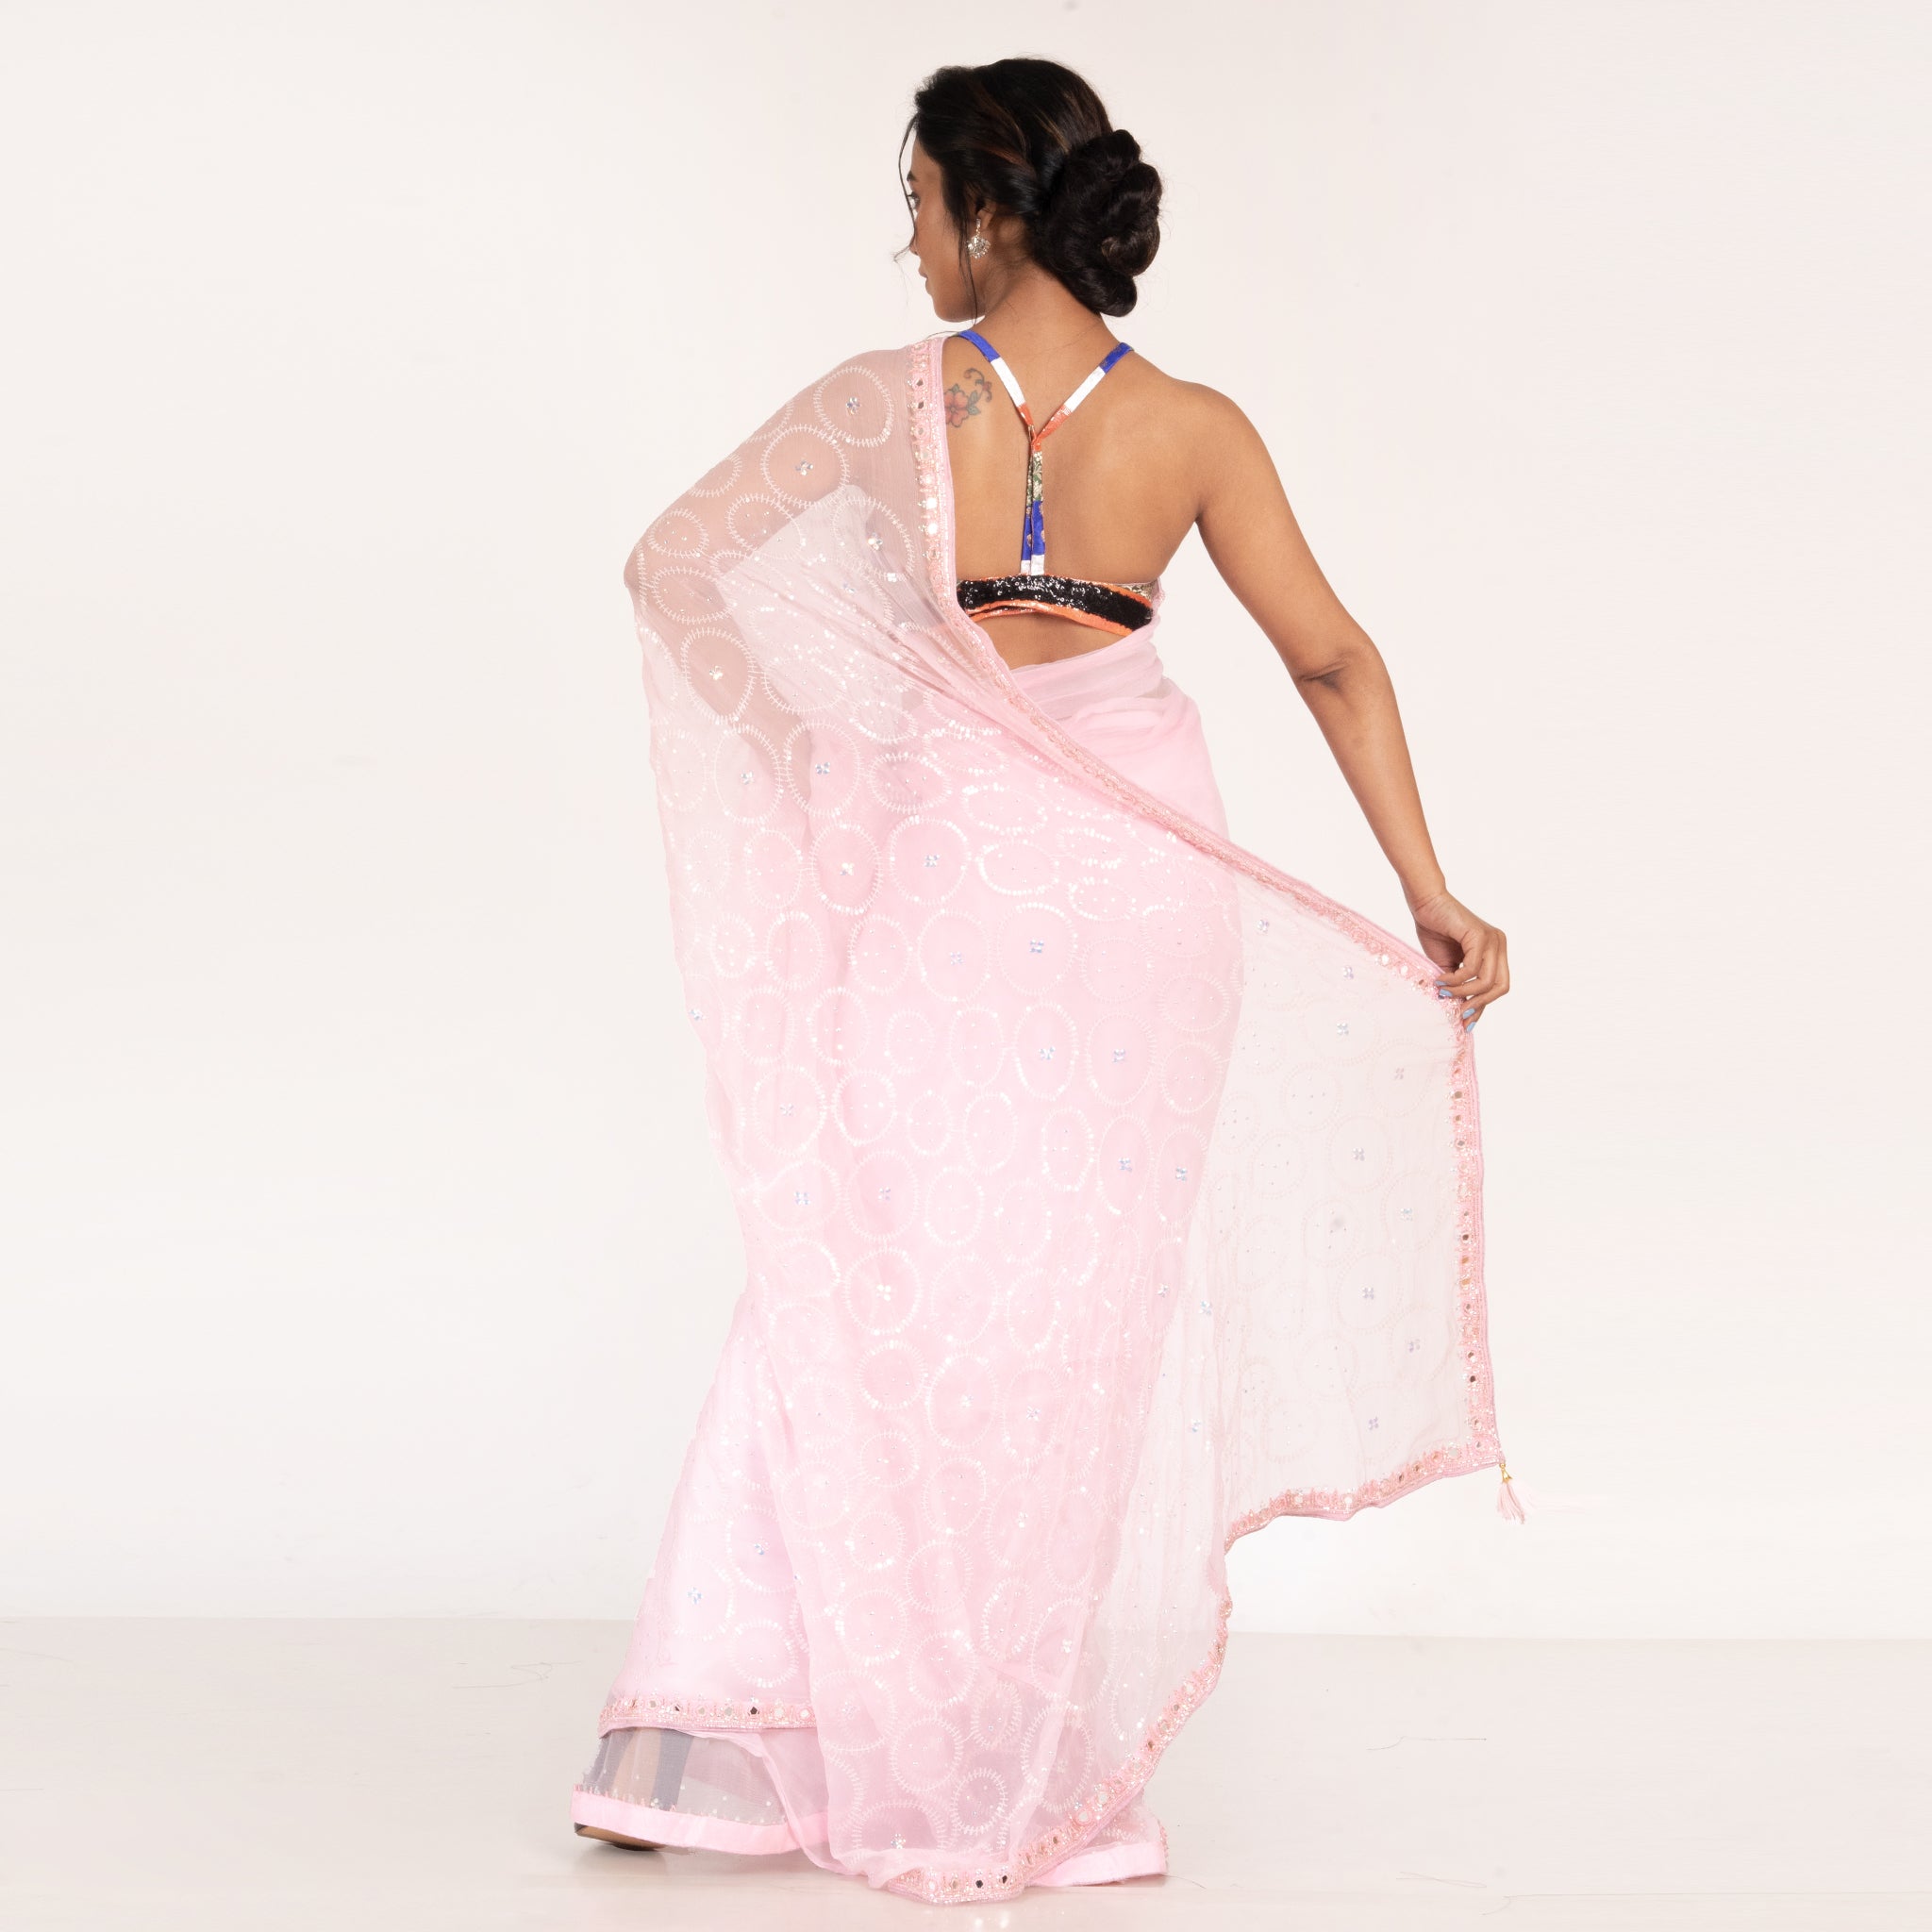 Women's Powder Pink Pure Chiffon Fully Embroidered Saree With Crystalisation - Boveee